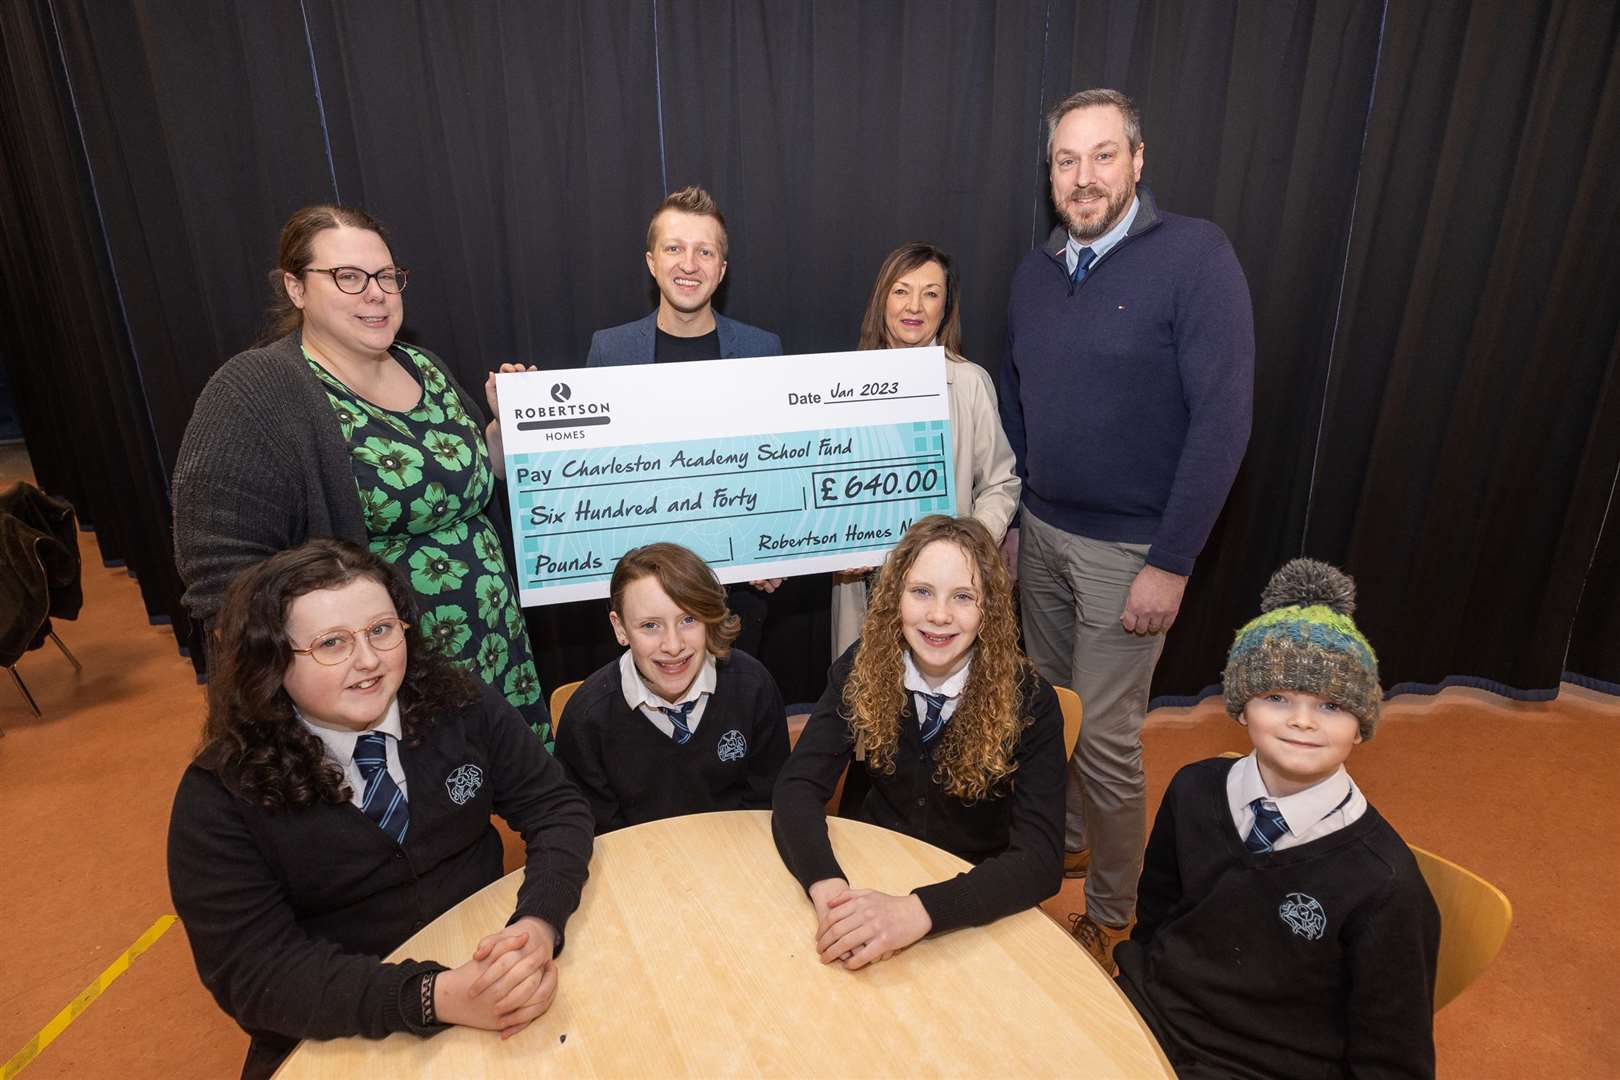 Back row (from left): Teachers Eilee MacLeod and Derek Sawyer with Jacqui McPherson and Neil Mackinlay (all Robertson Homes). Front row (from left): Pupils Aleisha Cornish, Nicole Lindsay, Meghan Lindsay and Archie Healy.